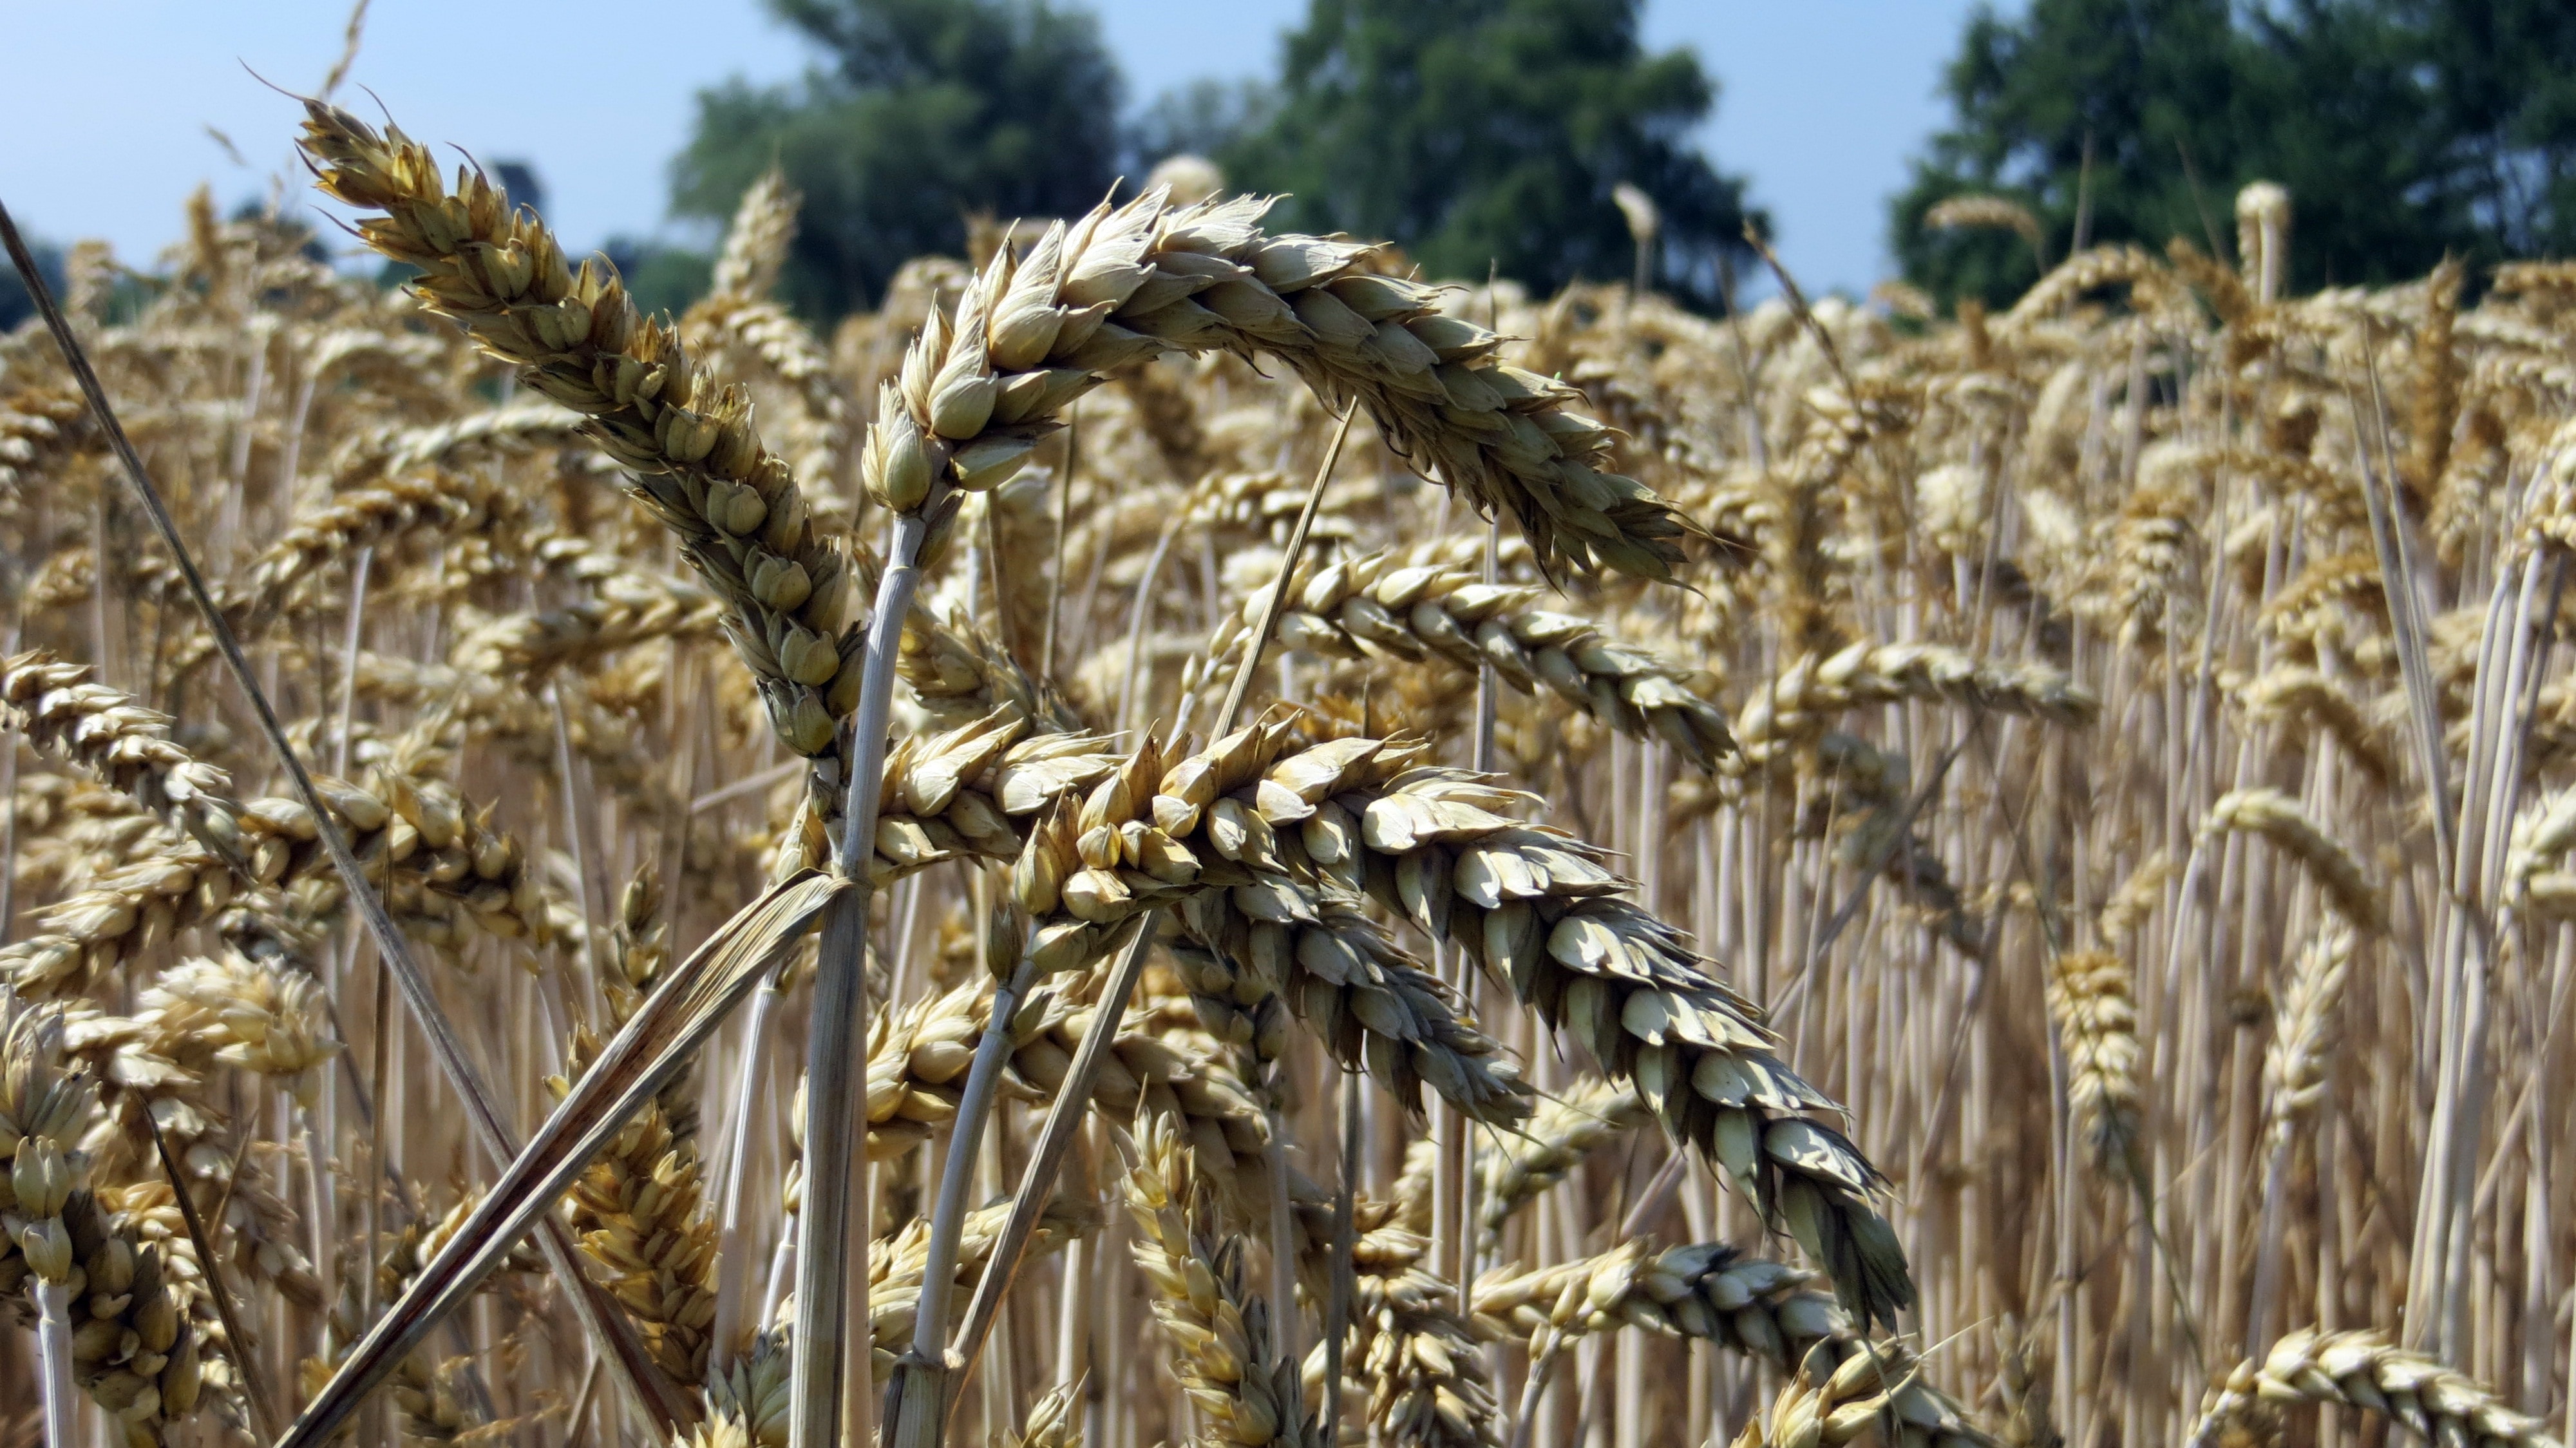 Grain, Food, Fields, Cereals, Spike, agriculture, crop